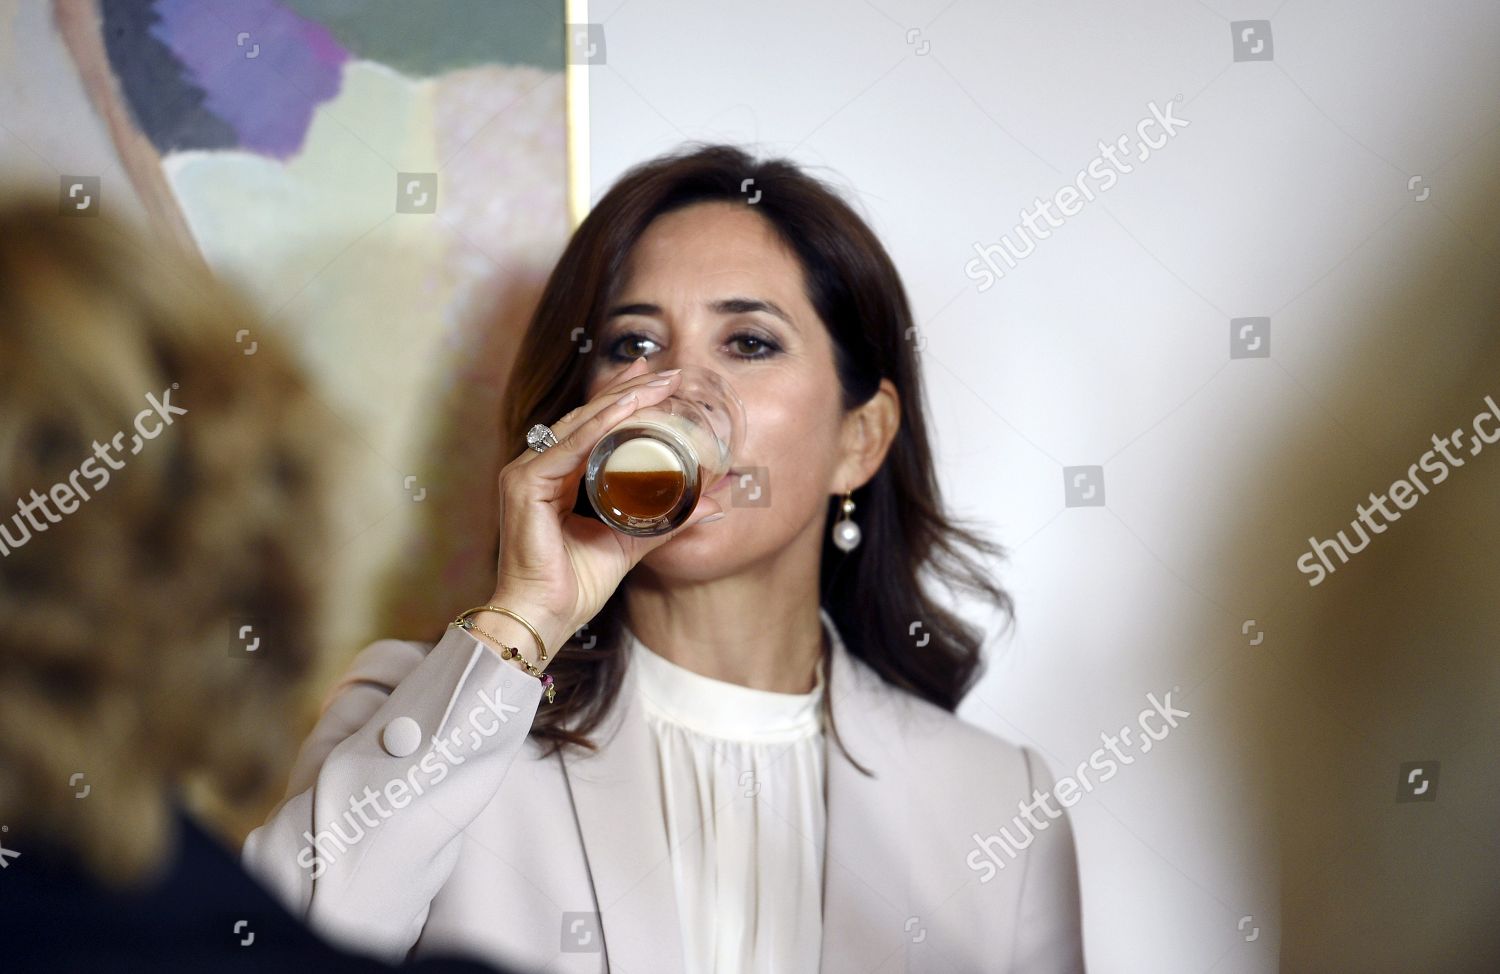 crown-princess-mary-visit-to-finland-shutterstock-editorial-9881096k.jpg